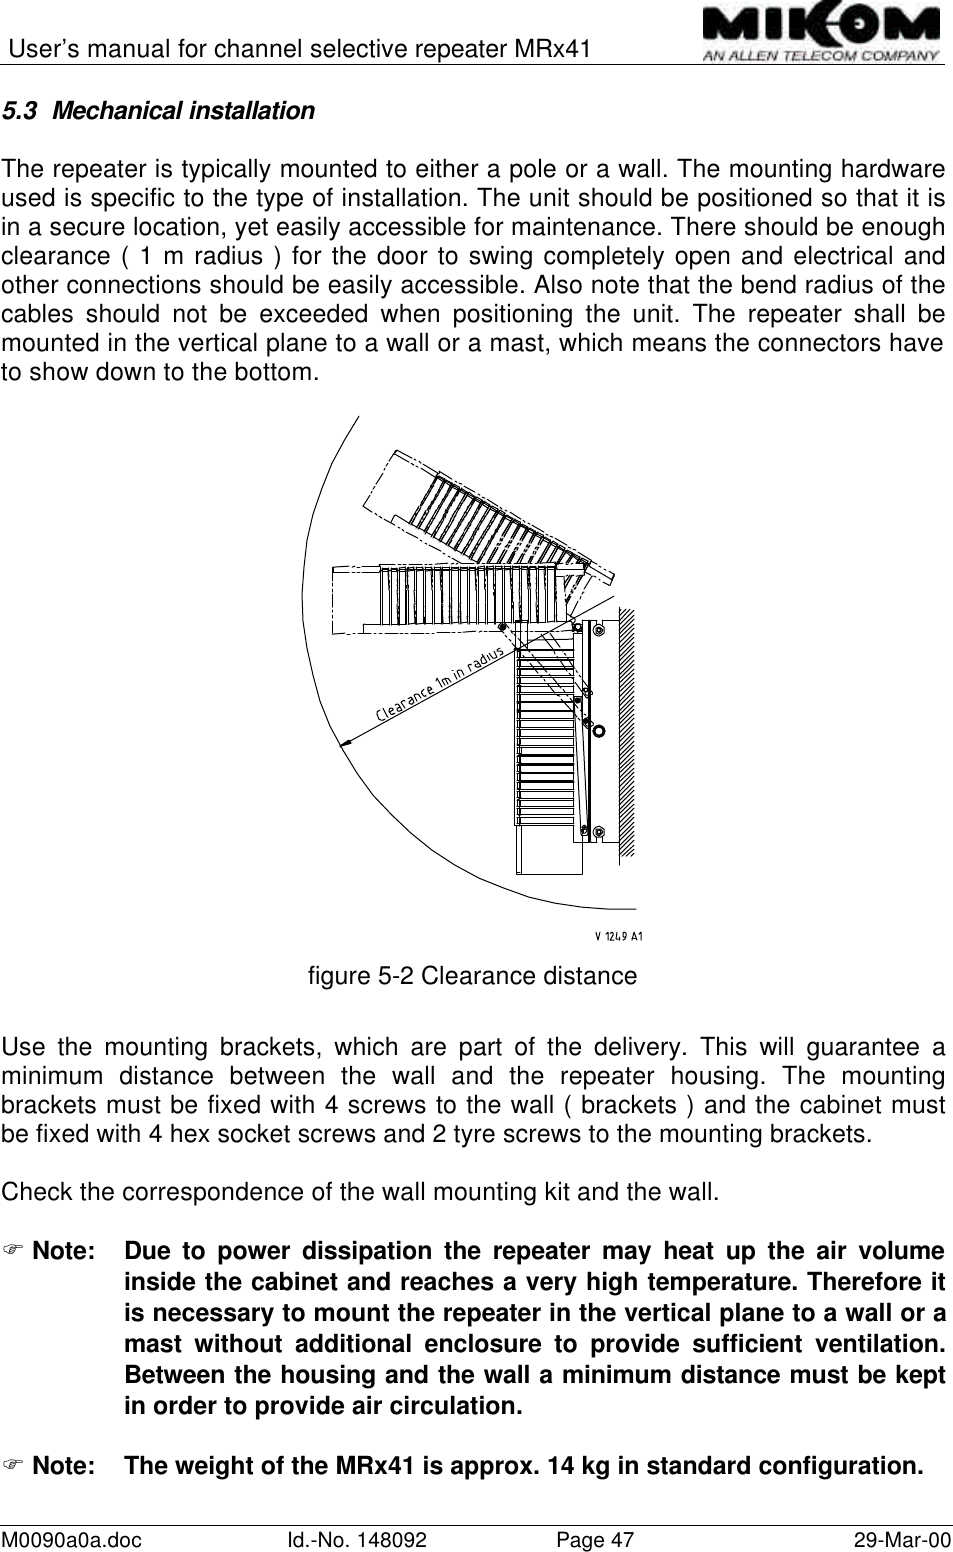 User’s manual for channel selective repeater MRx41M0090a0a.doc Id.-No. 148092 Page 47 29-Mar-005.3 Mechanical installationThe repeater is typically mounted to either a pole or a wall. The mounting hardwareused is specific to the type of installation. The unit should be positioned so that it isin a secure location, yet easily accessible for maintenance. There should be enoughclearance ( 1 m radius ) for the door to swing completely open and electrical andother connections should be easily accessible. Also note that the bend radius of thecables should not be exceeded when positioning the unit. The repeater shall bemounted in the vertical plane to a wall or a mast, which means the connectors haveto show down to the bottom.figure 5-2 Clearance distanceUse the mounting brackets, which are part of the delivery. This will guarantee aminimum distance between the wall and the repeater housing. The mountingbrackets must be fixed with 4 screws to the wall ( brackets ) and the cabinet mustbe fixed with 4 hex socket screws and 2 tyre screws to the mounting brackets.Check the correspondence of the wall mounting kit and the wall.F Note: Due to power dissipation the repeater may heat up the air volumeinside the cabinet and reaches a very high temperature. Therefore itis necessary to mount the repeater in the vertical plane to a wall or amast without additional enclosure to provide sufficient ventilation.Between the housing and the wall a minimum distance must be keptin order to provide air circulation.F Note: The weight of the MRx41 is approx. 14 kg in standard configuration.